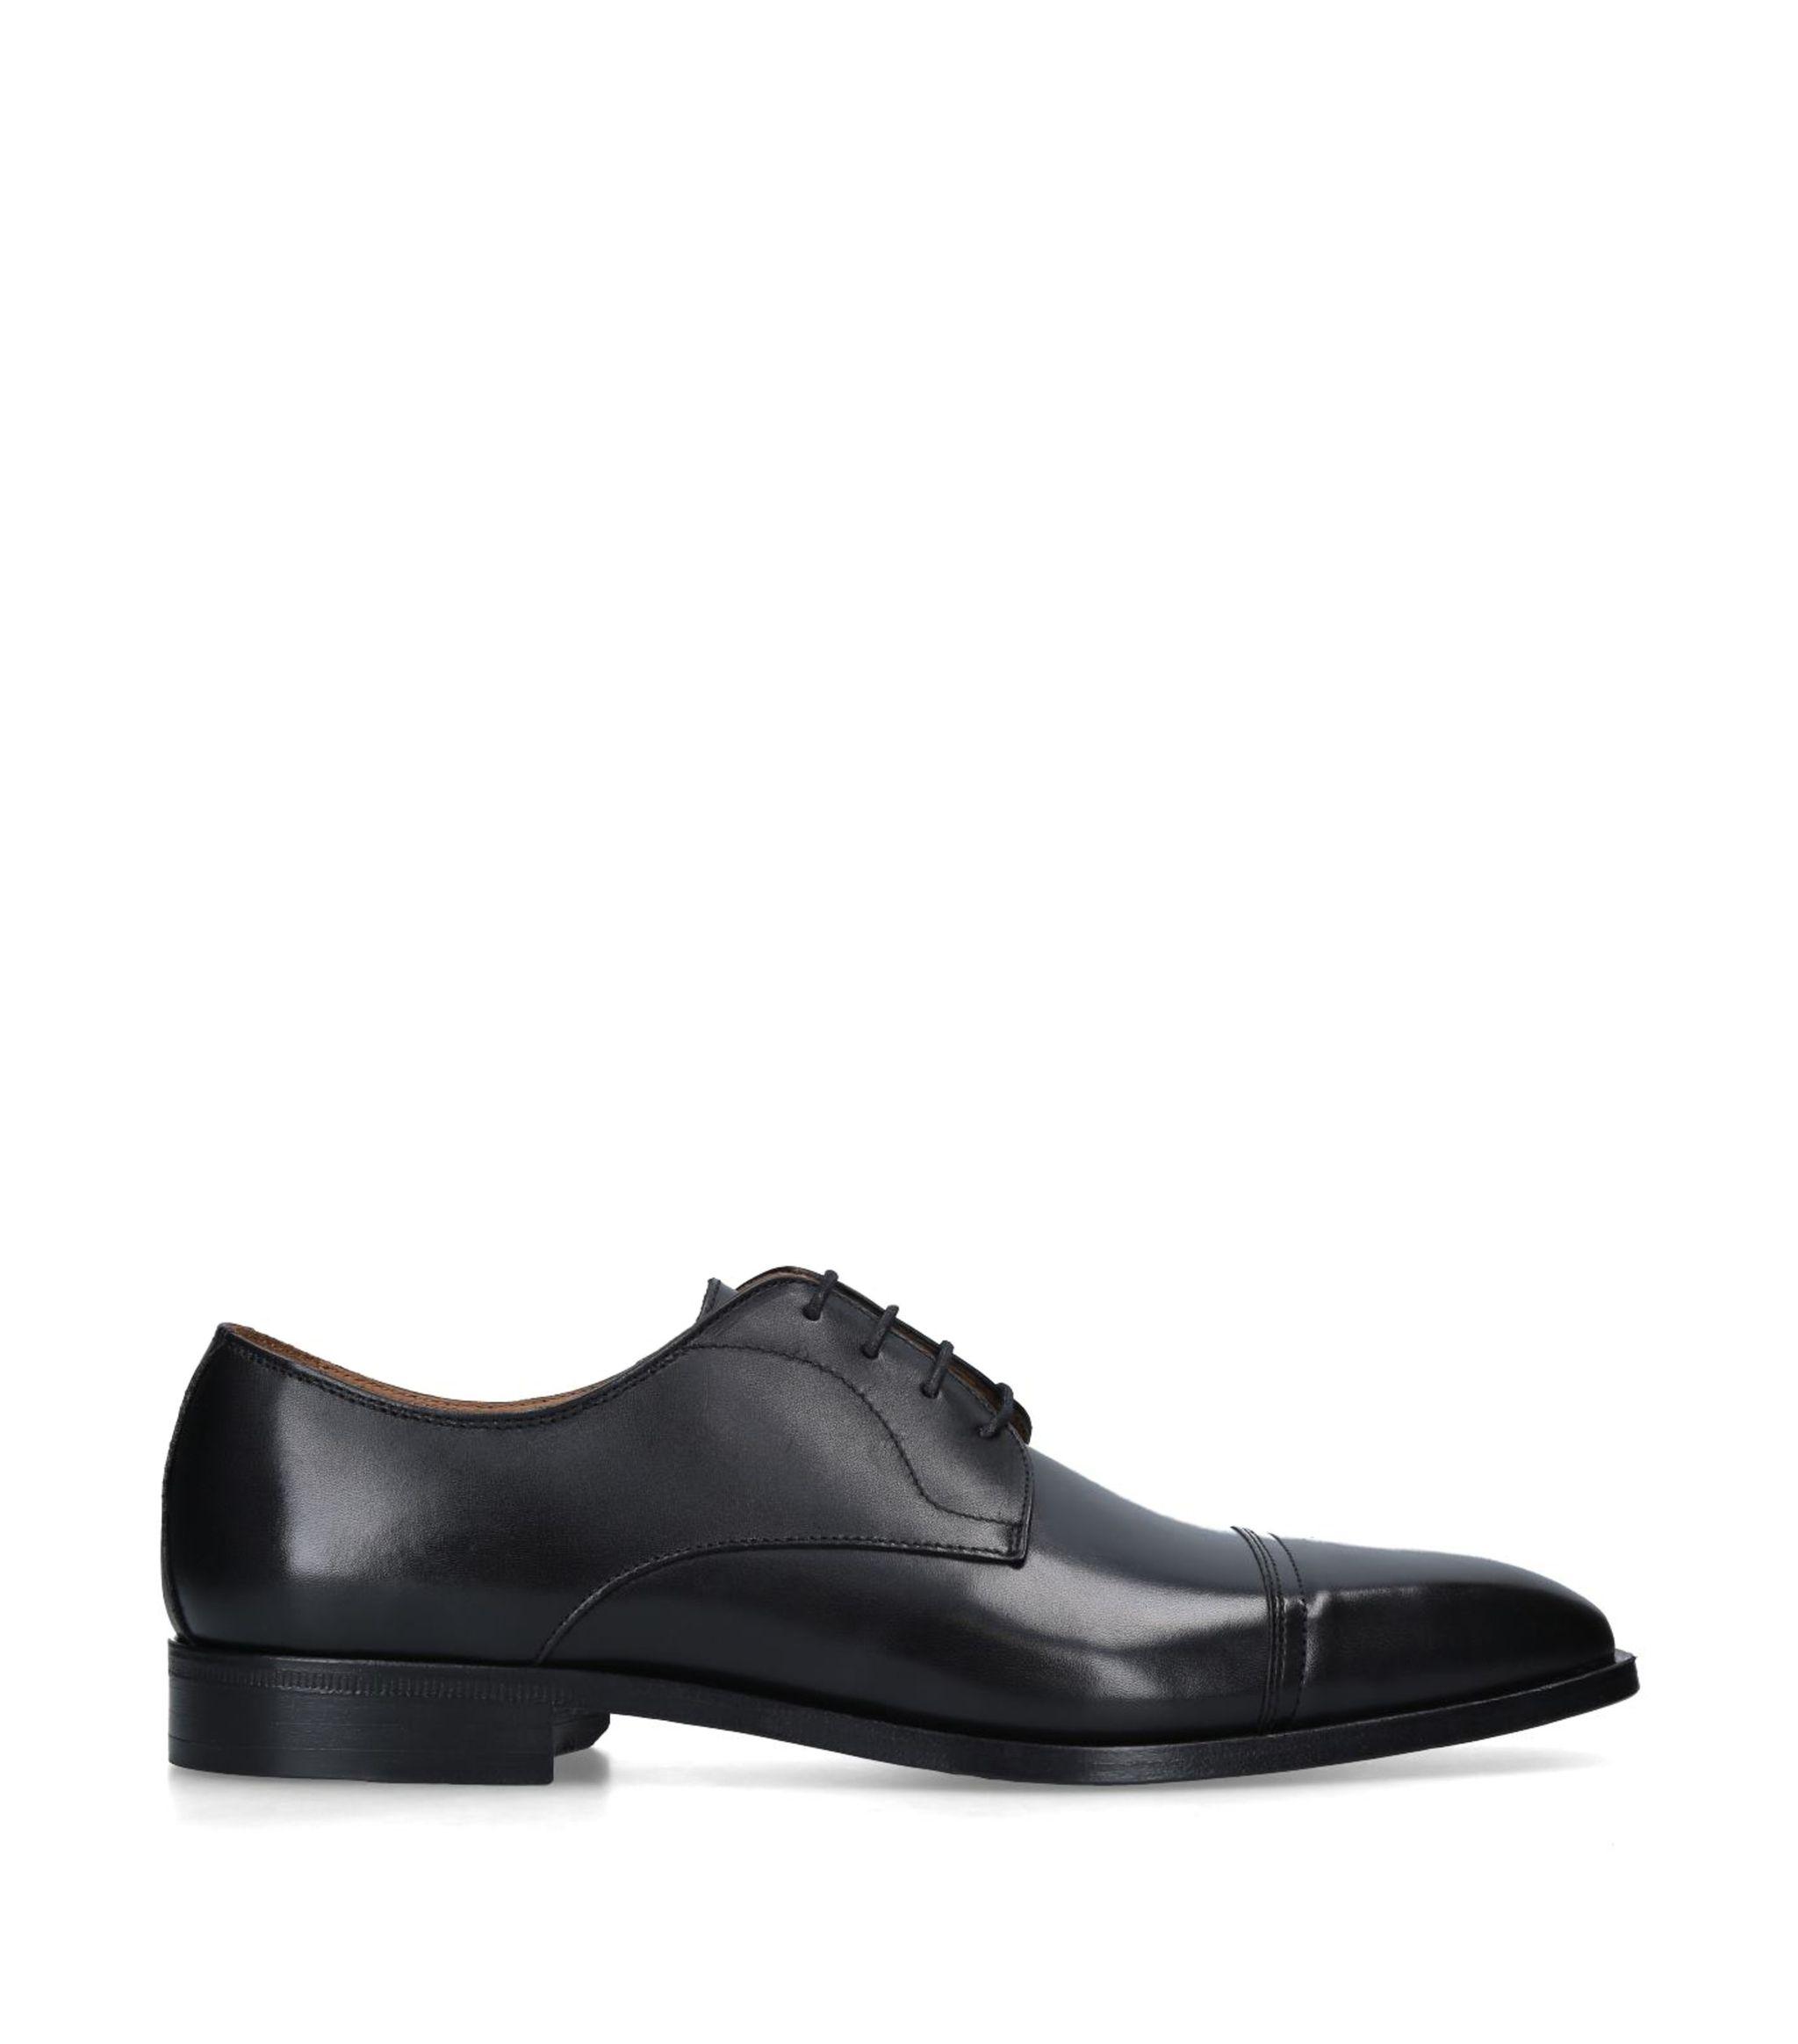 BOSS by Hugo Boss Leather Richmont Derby Shoes in Black for Men - Lyst